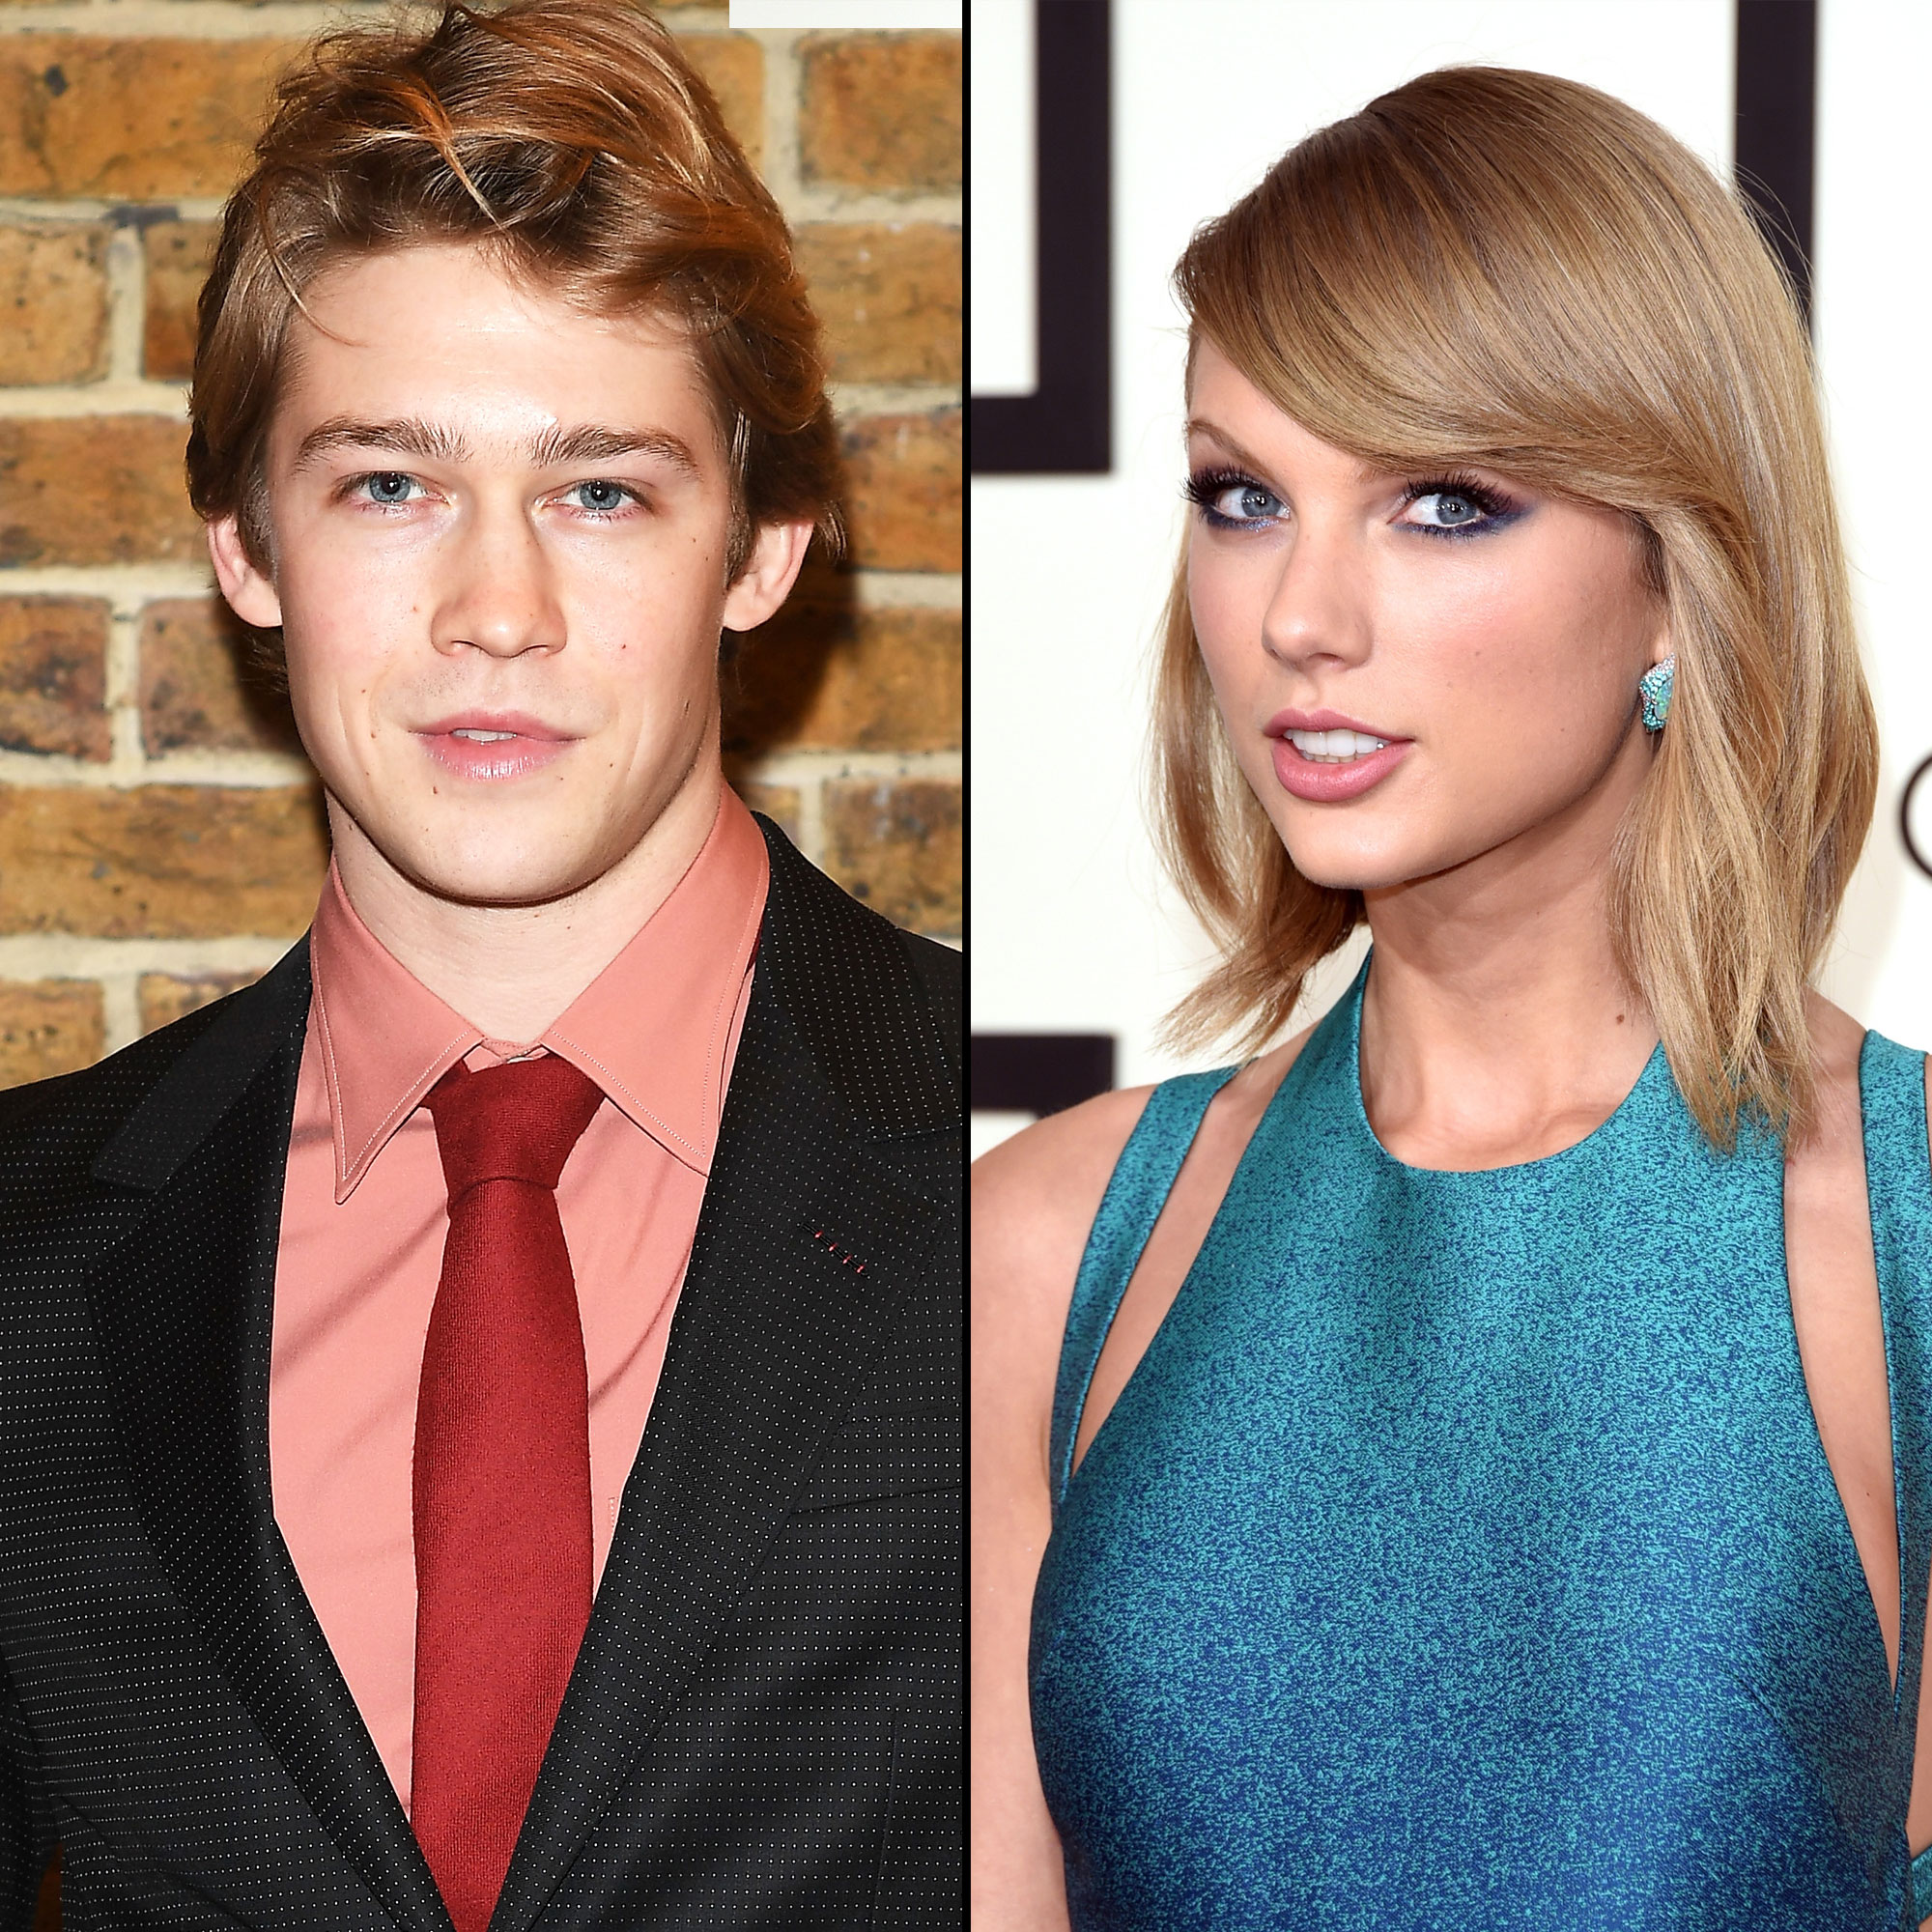 Taylor Swift's Secret Love Life: Who Is She Dating Now?